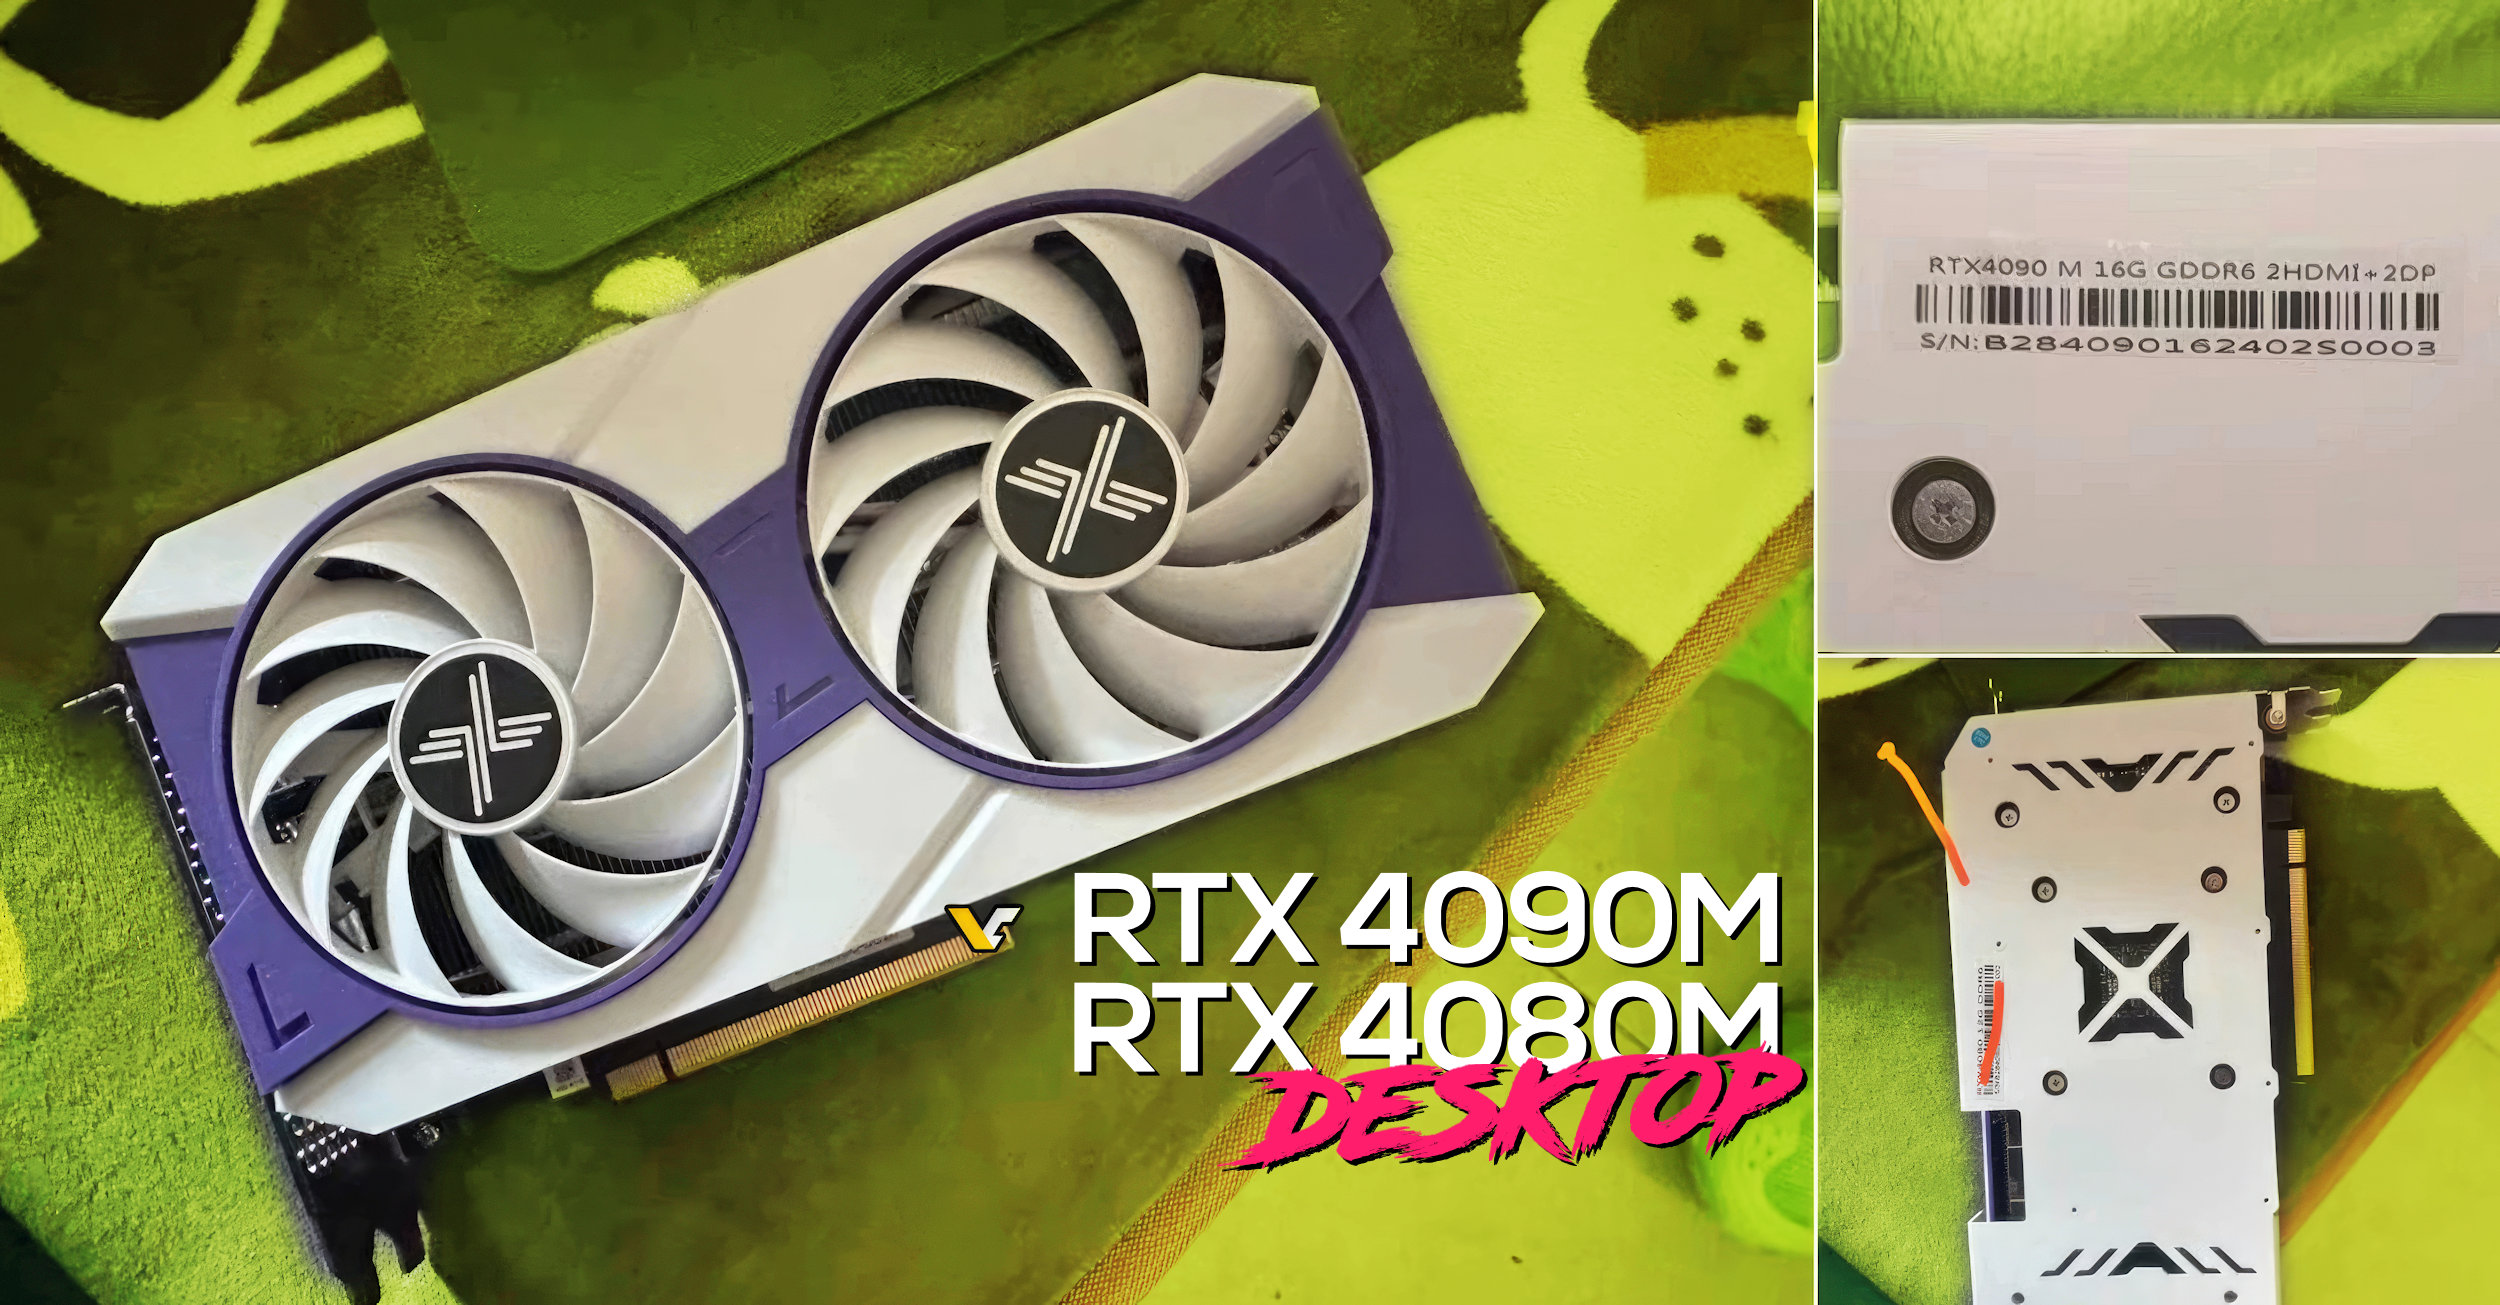 Unleash the Future: China Gets its Hands on GeForce RTX 4080M and RTX 4090M for Superior Desktop Gaming Experience